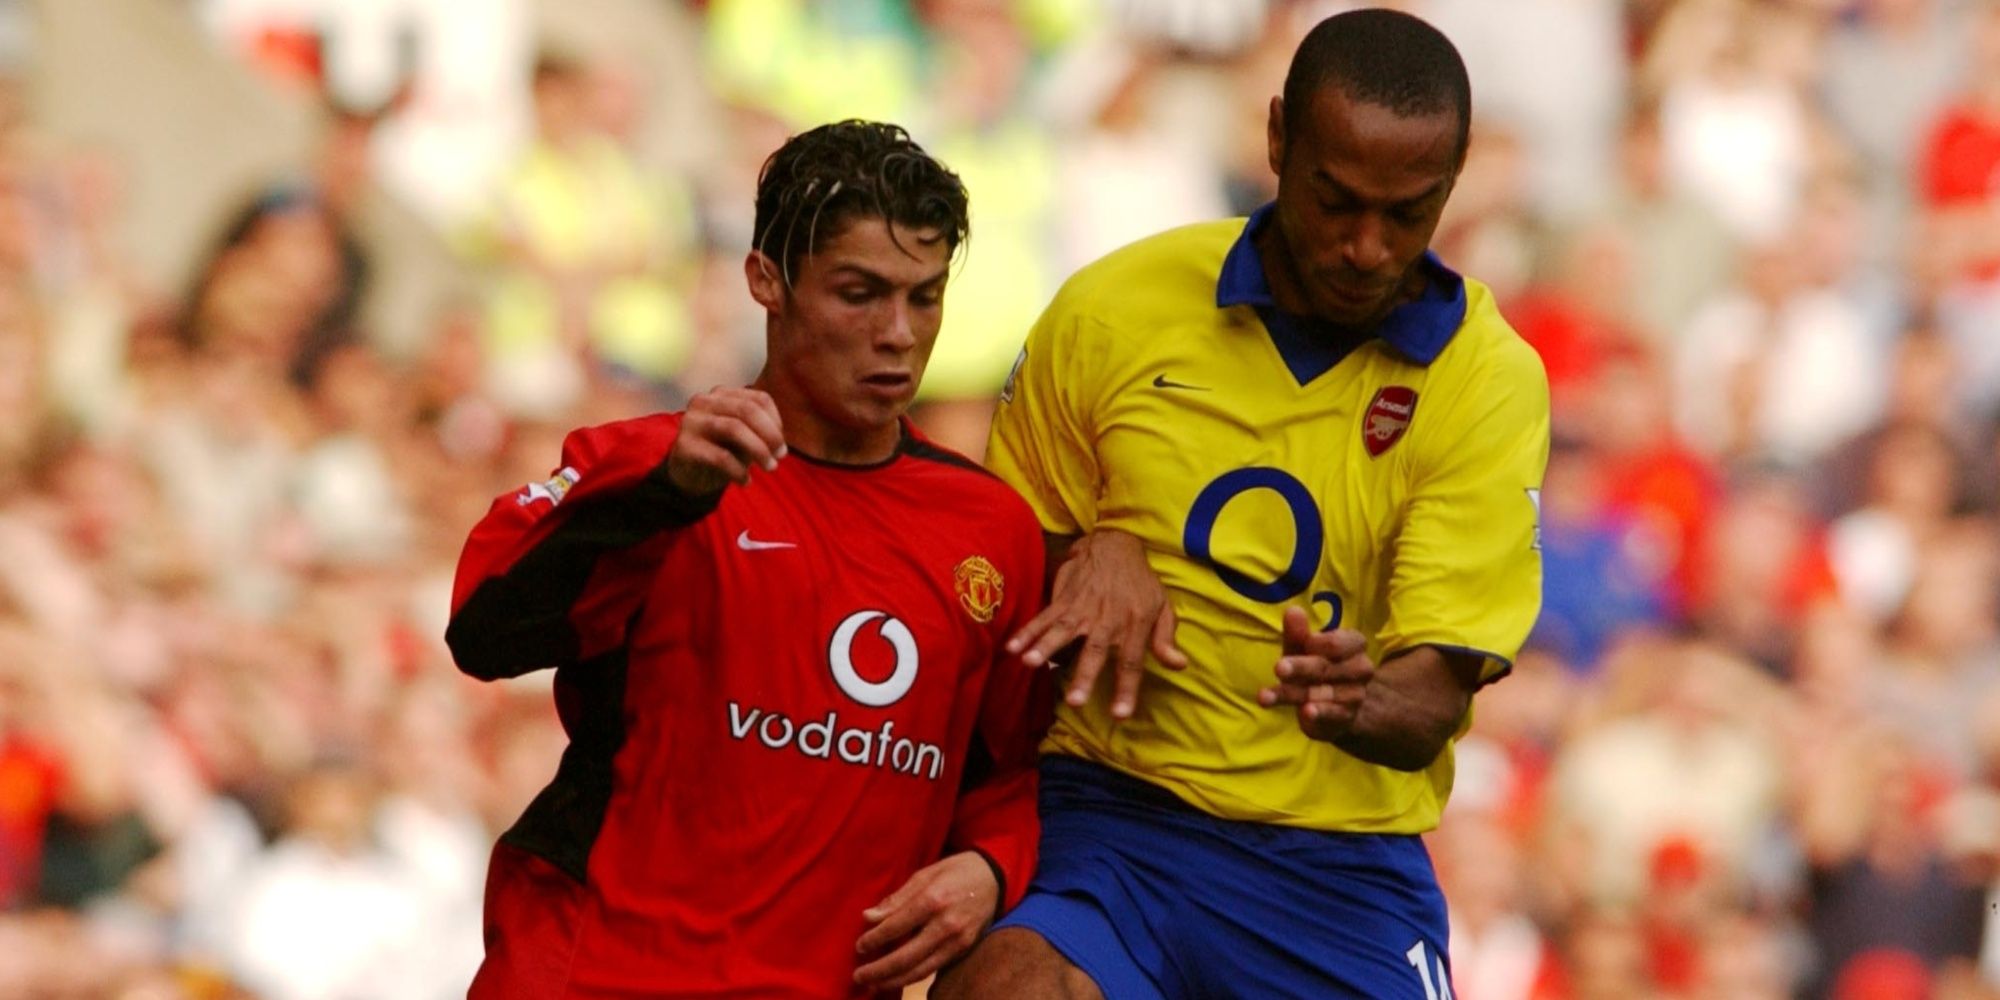 Cristiano Ronaldo - Manchester United in action against Thierry Henry - Arsenal